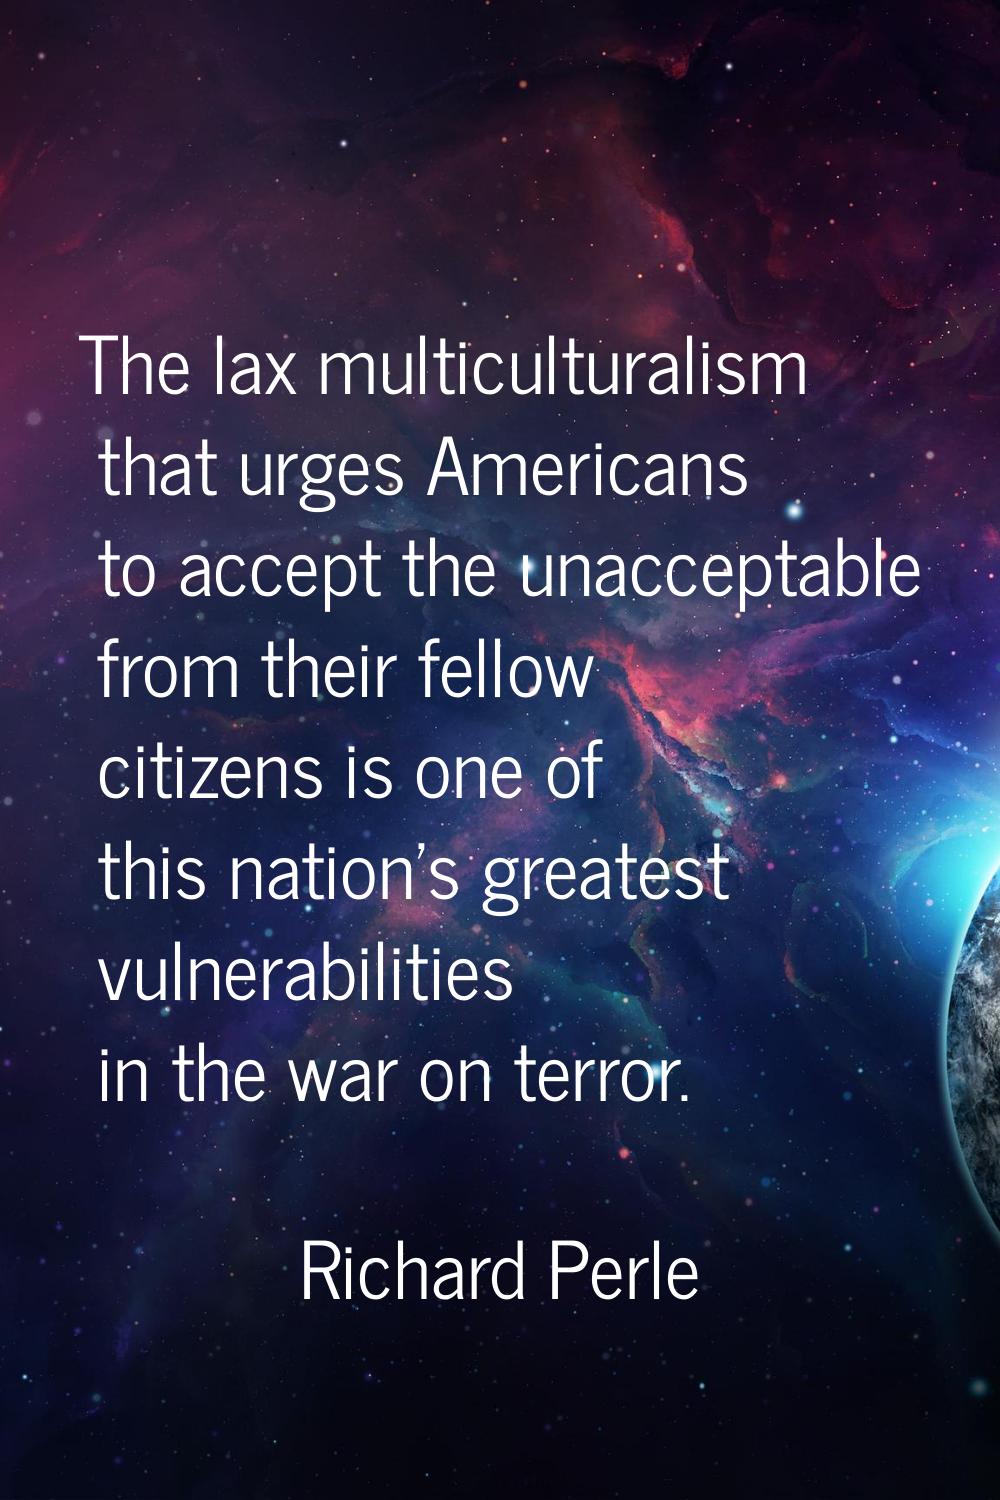 The lax multiculturalism that urges Americans to accept the unacceptable from their fellow citizens